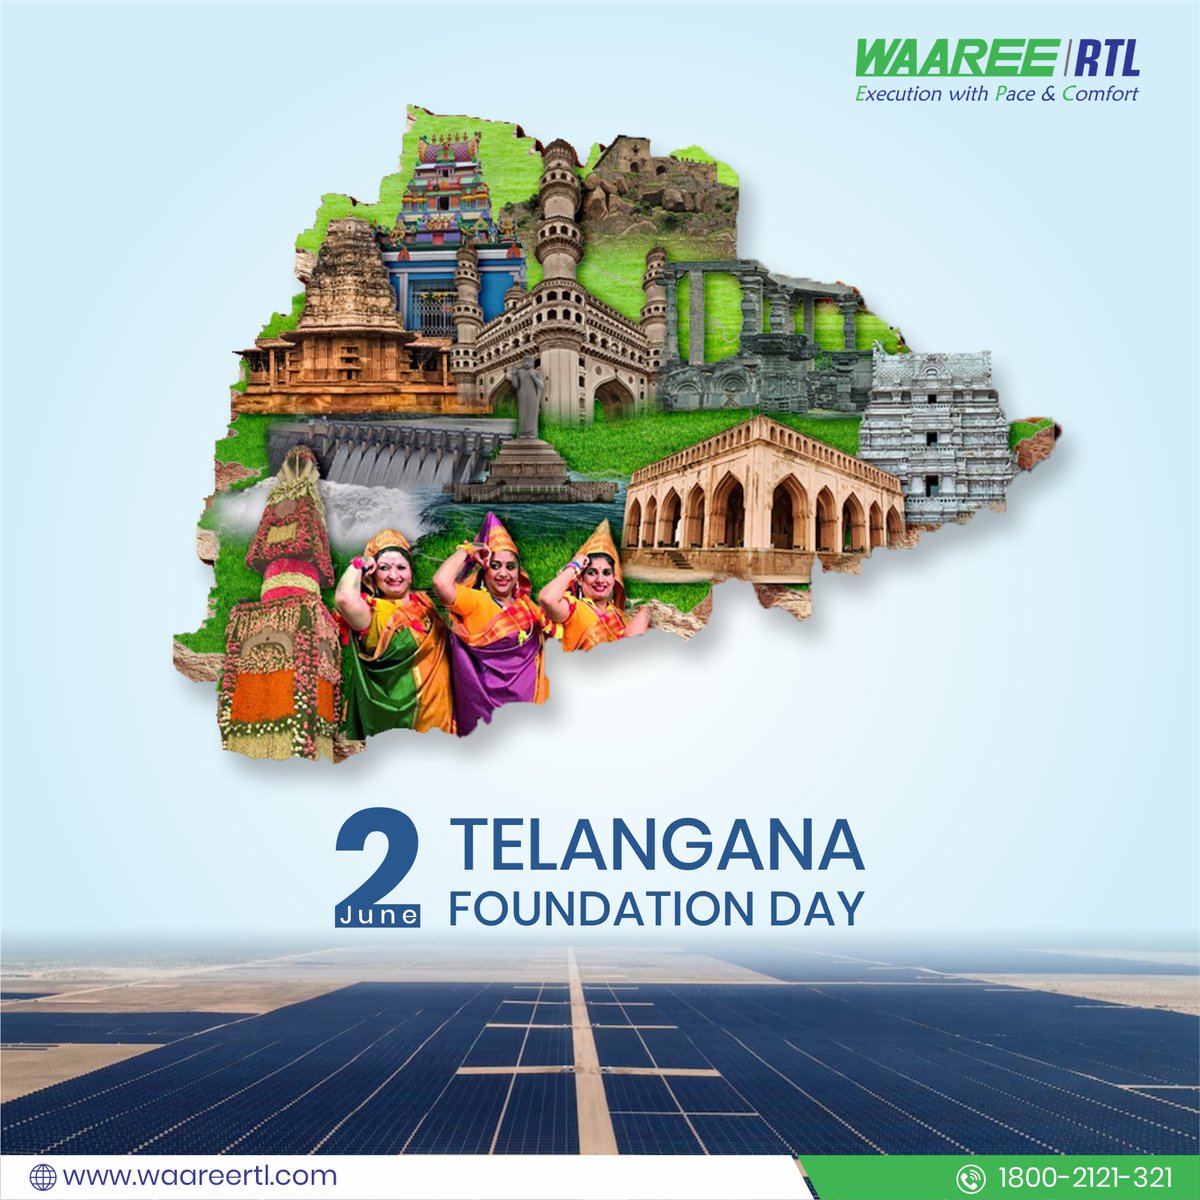 We wish the residents of Telangana a year full of growth and boundless joy. May you prosper every day under the light of the Sun.
Happy Telangana Foundation Day!

#TelanganaFoundationDay #HappyFoundationDay #YearofGrowth #TelanganaProgress #WishingYouProsperity